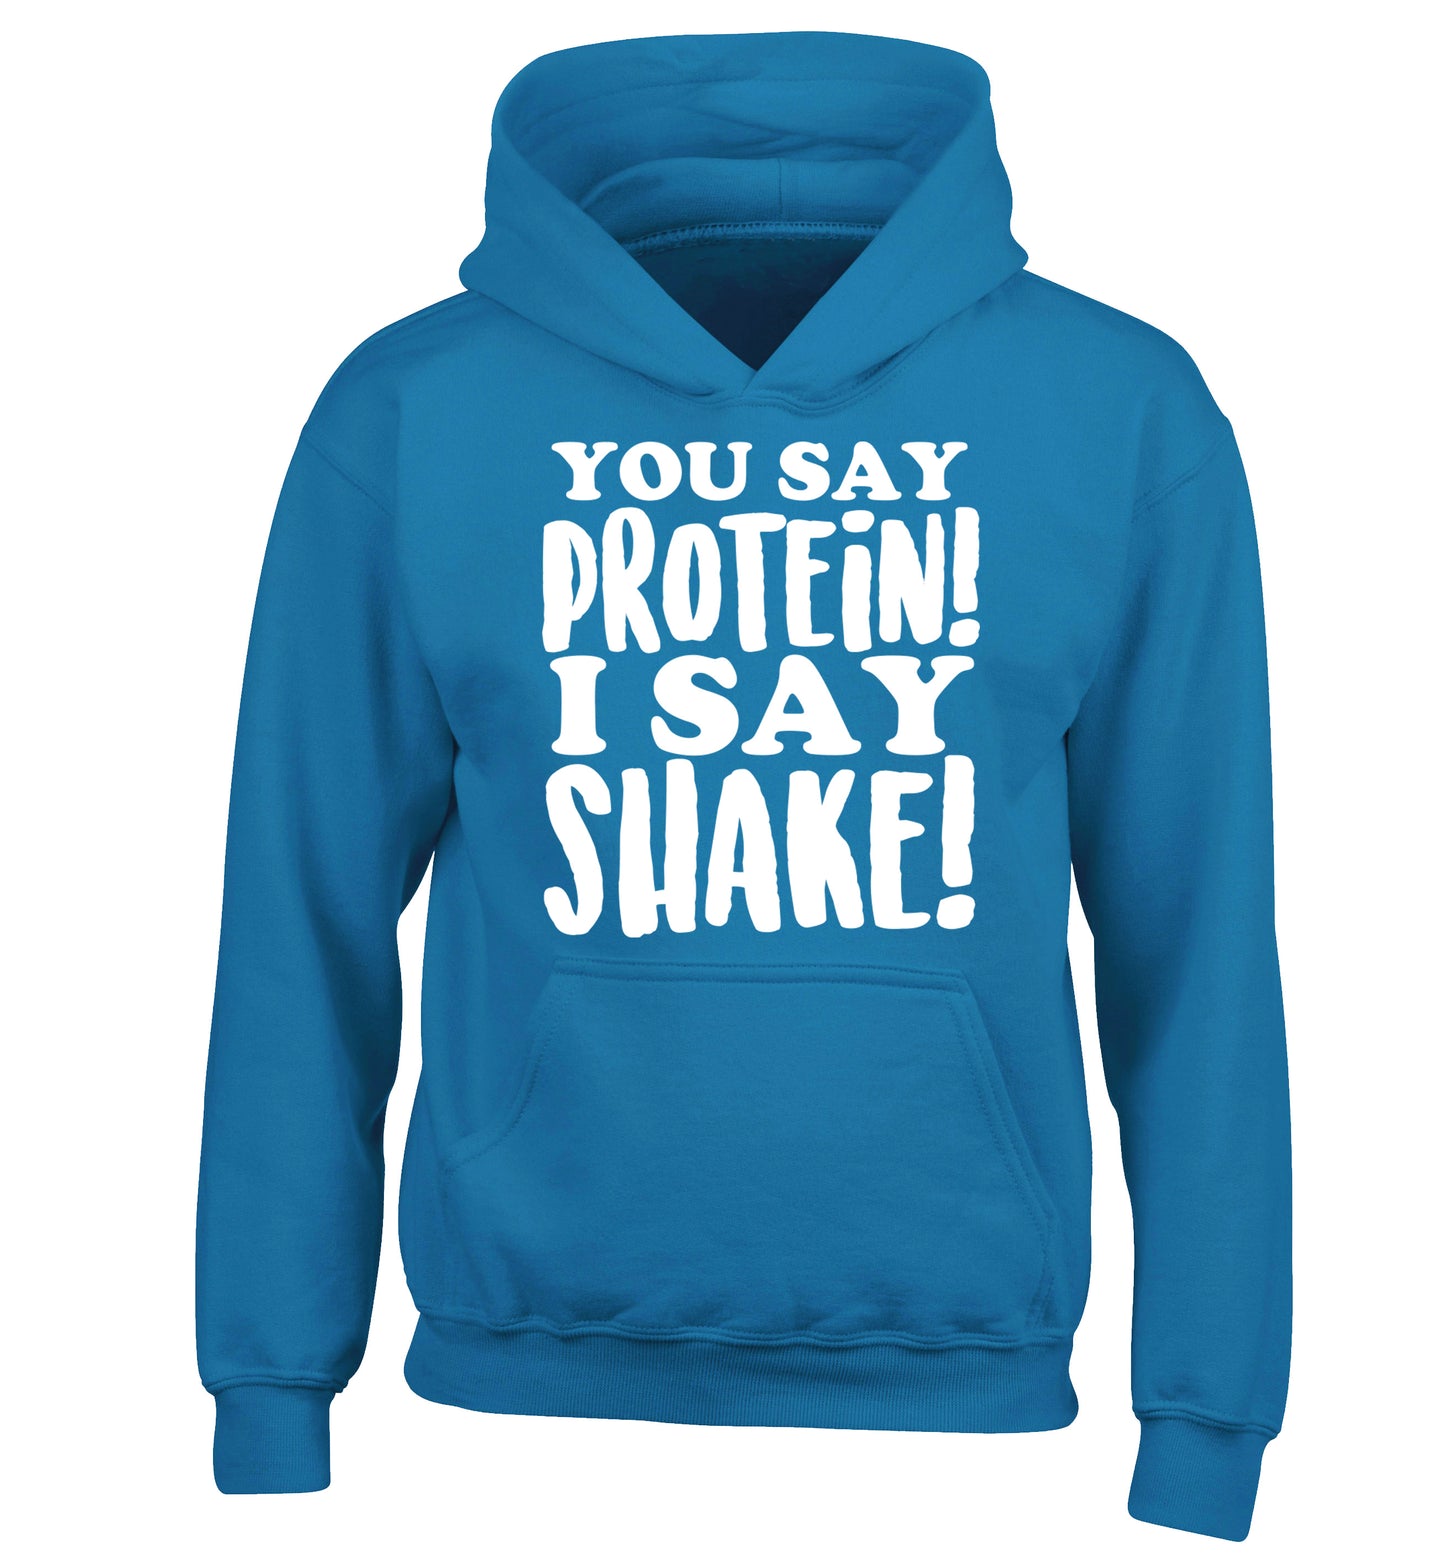 You say protein I say shake! children's blue hoodie 12-14 Years